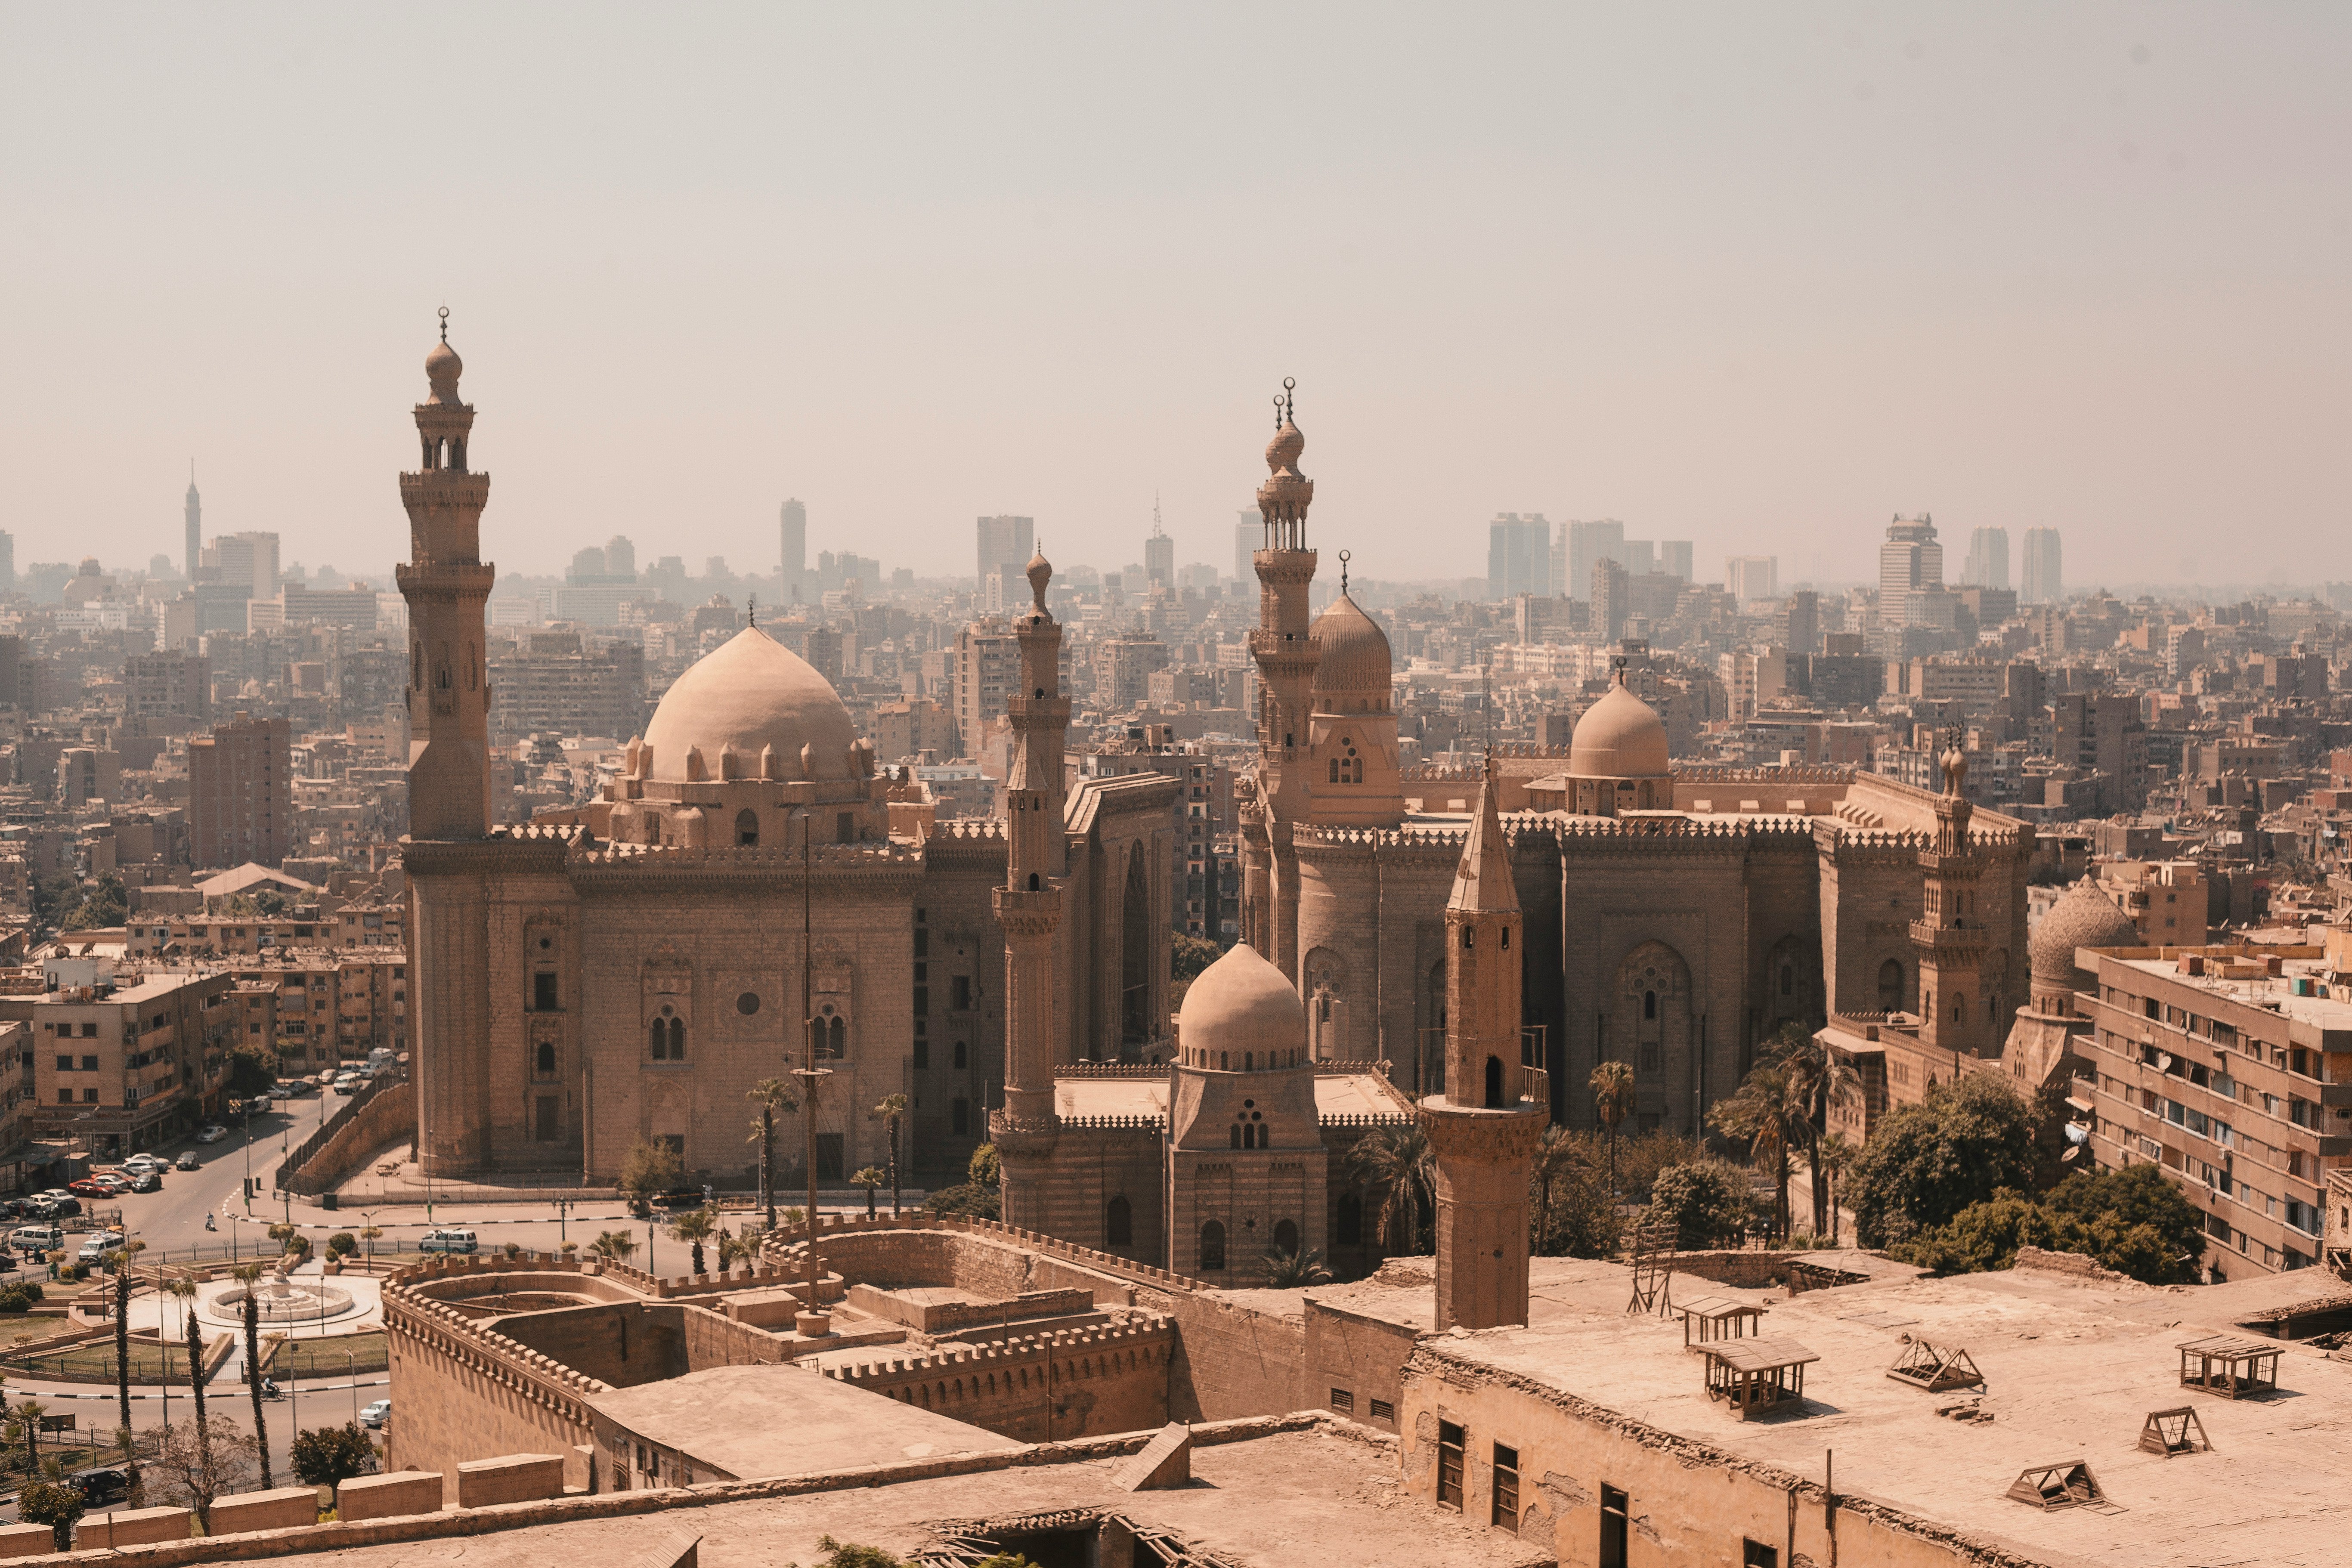 Cairo has a population of over 10 million people